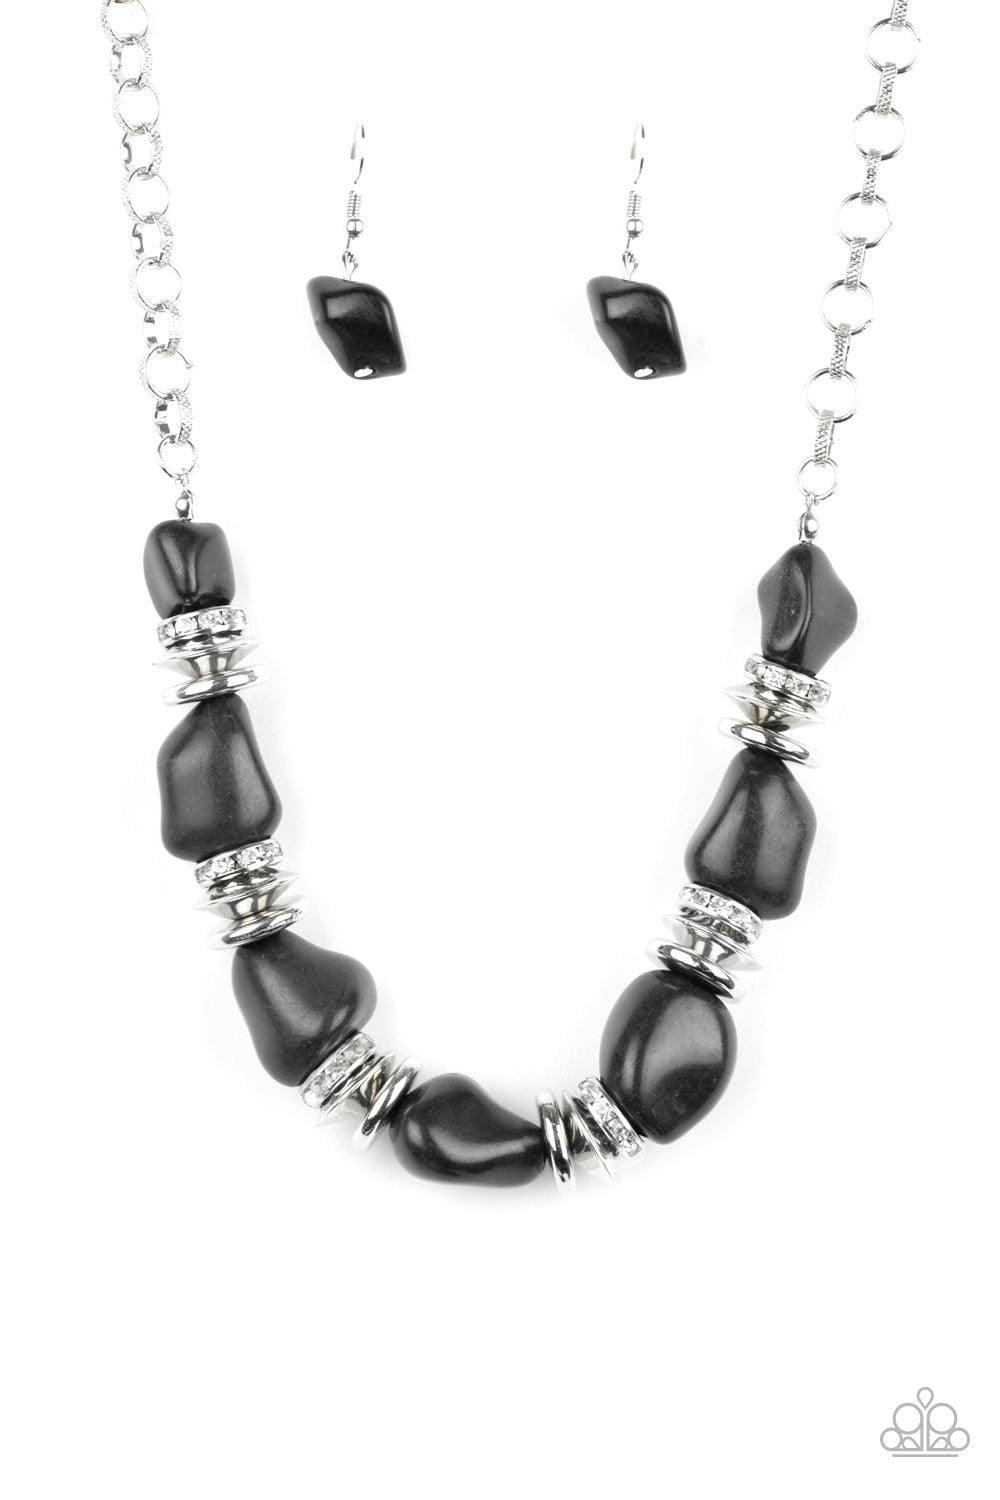 Paparazzi Accessories - Stunningly Stone Age - Black Necklace - Bling by JessieK